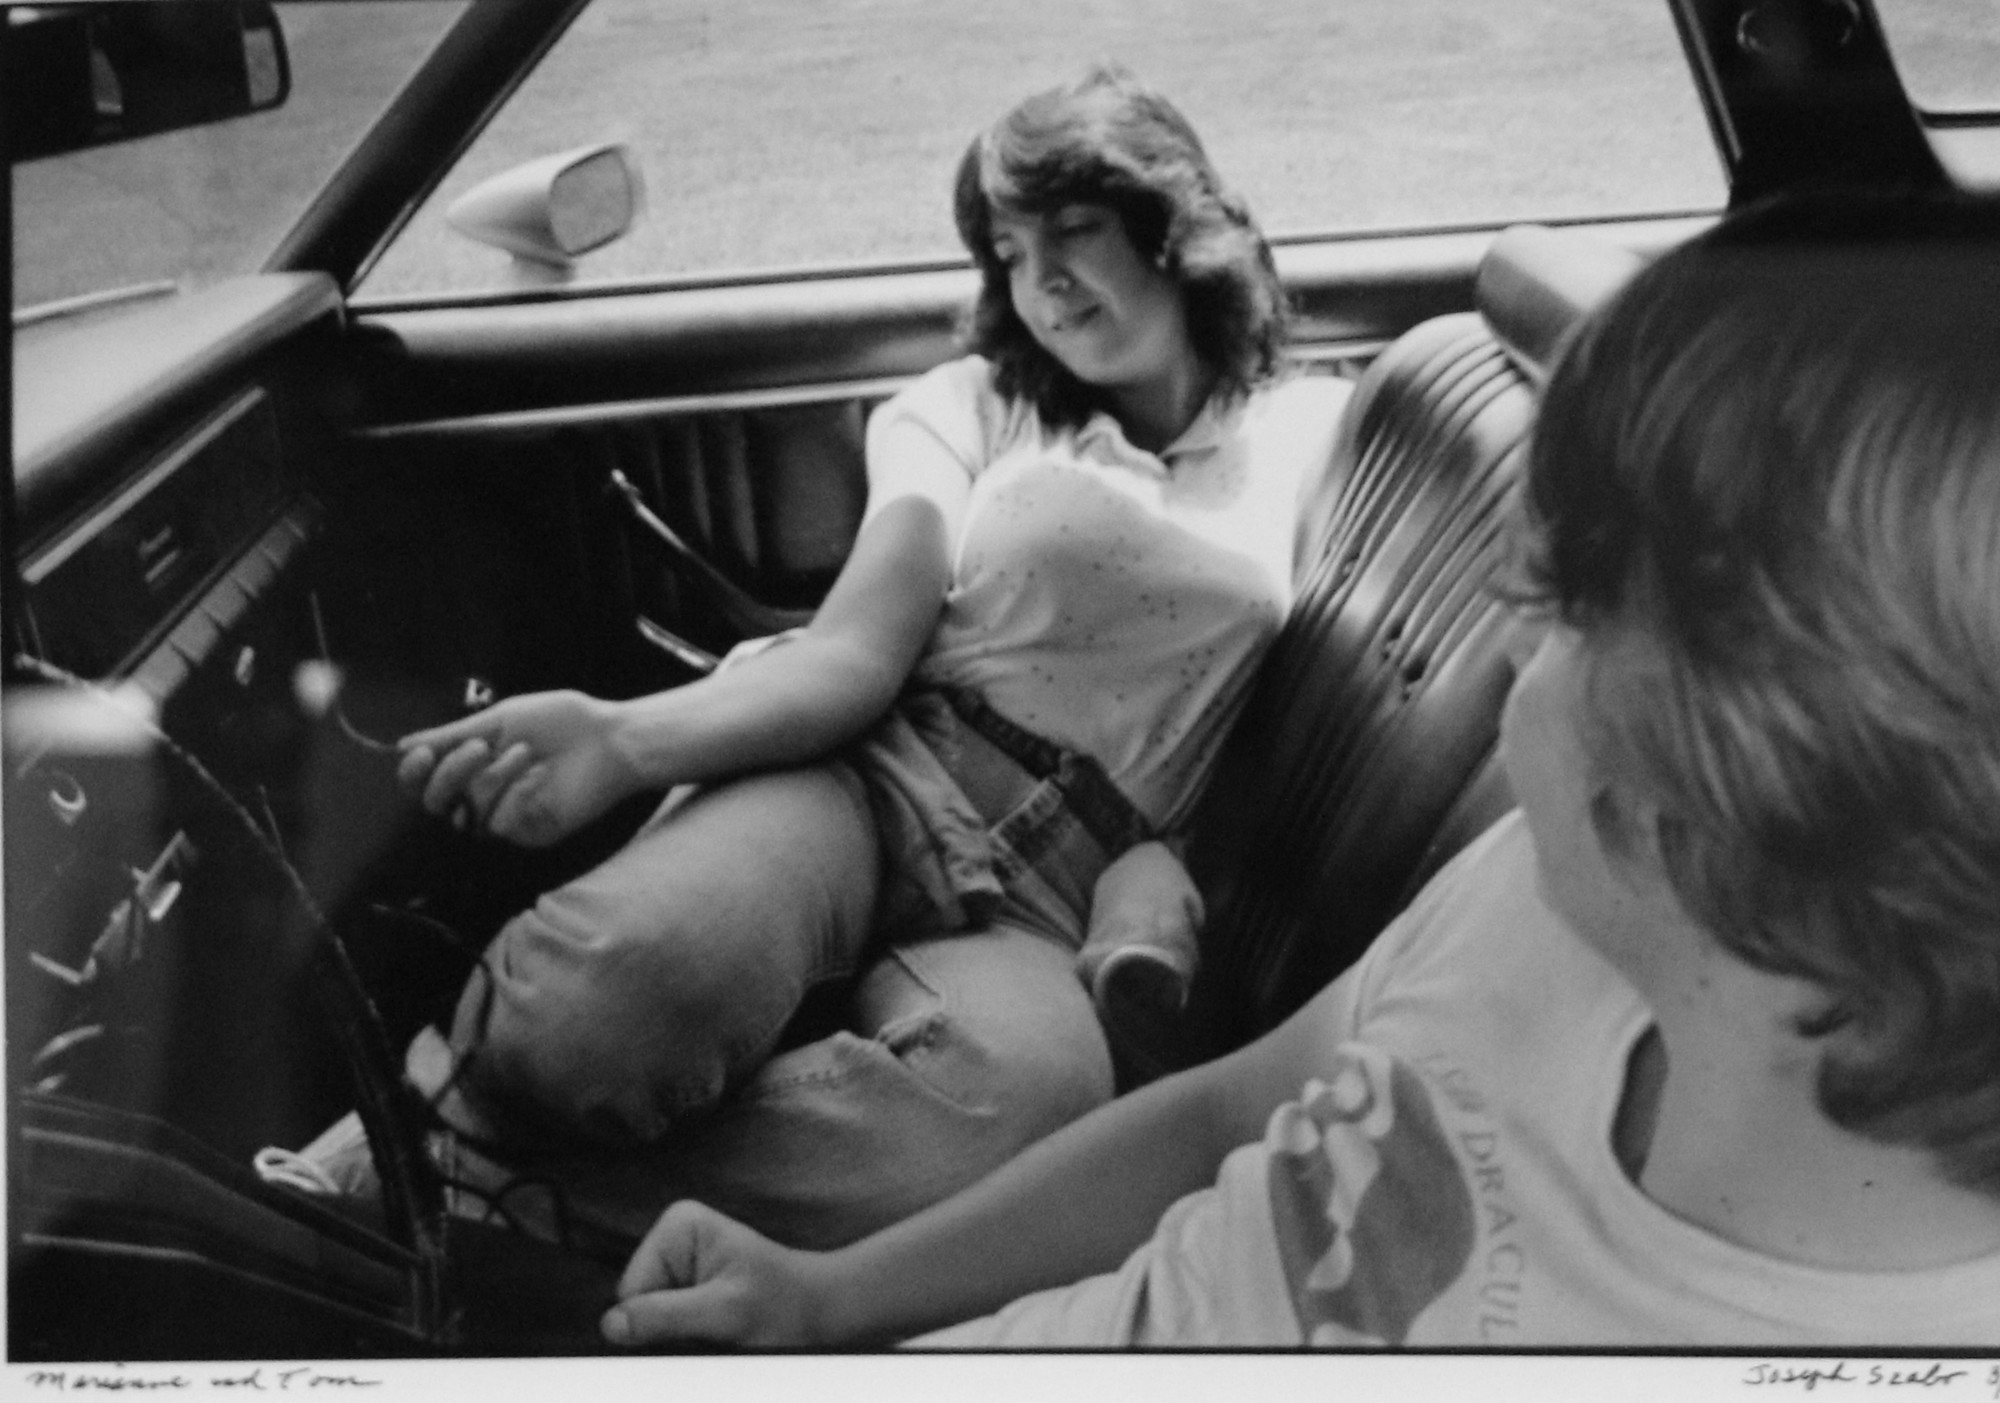 Szabo’s photo, “Marianne and Tom,” is part of a permanent collection at the Metropolitan Museum of Art. The photo is of Malverne residents Marianne and Tom Malone as teenagers at Malverne High School. A copy is currently up for auction through the International Center of Photography.